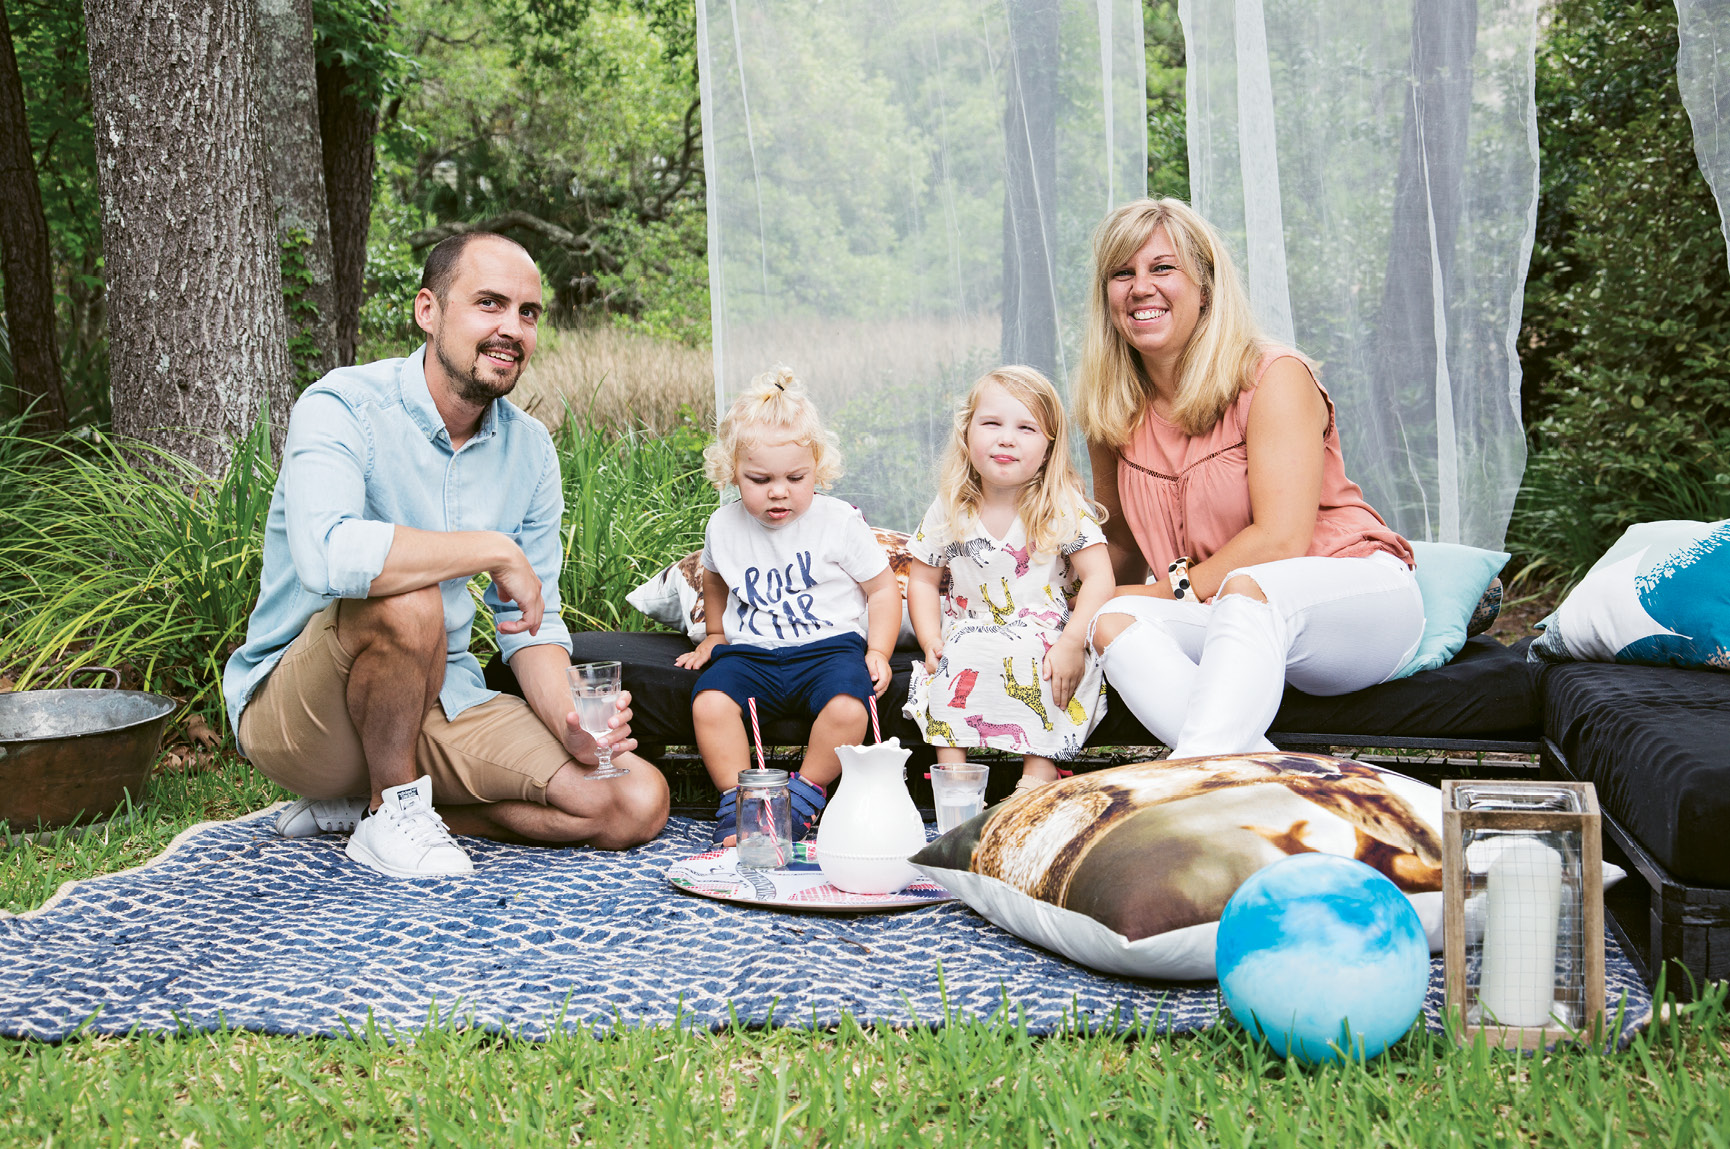 FAMILY TIME: Jacob and Therese Lenberg picnic with their children in their Hobcaw Creek backyard. The Swedish couple’s abode is chock-full of Scandinavian style, beginning with the entryway (left), where one clock is set to local time and another displays the hour in their hometown of Gothenburg.